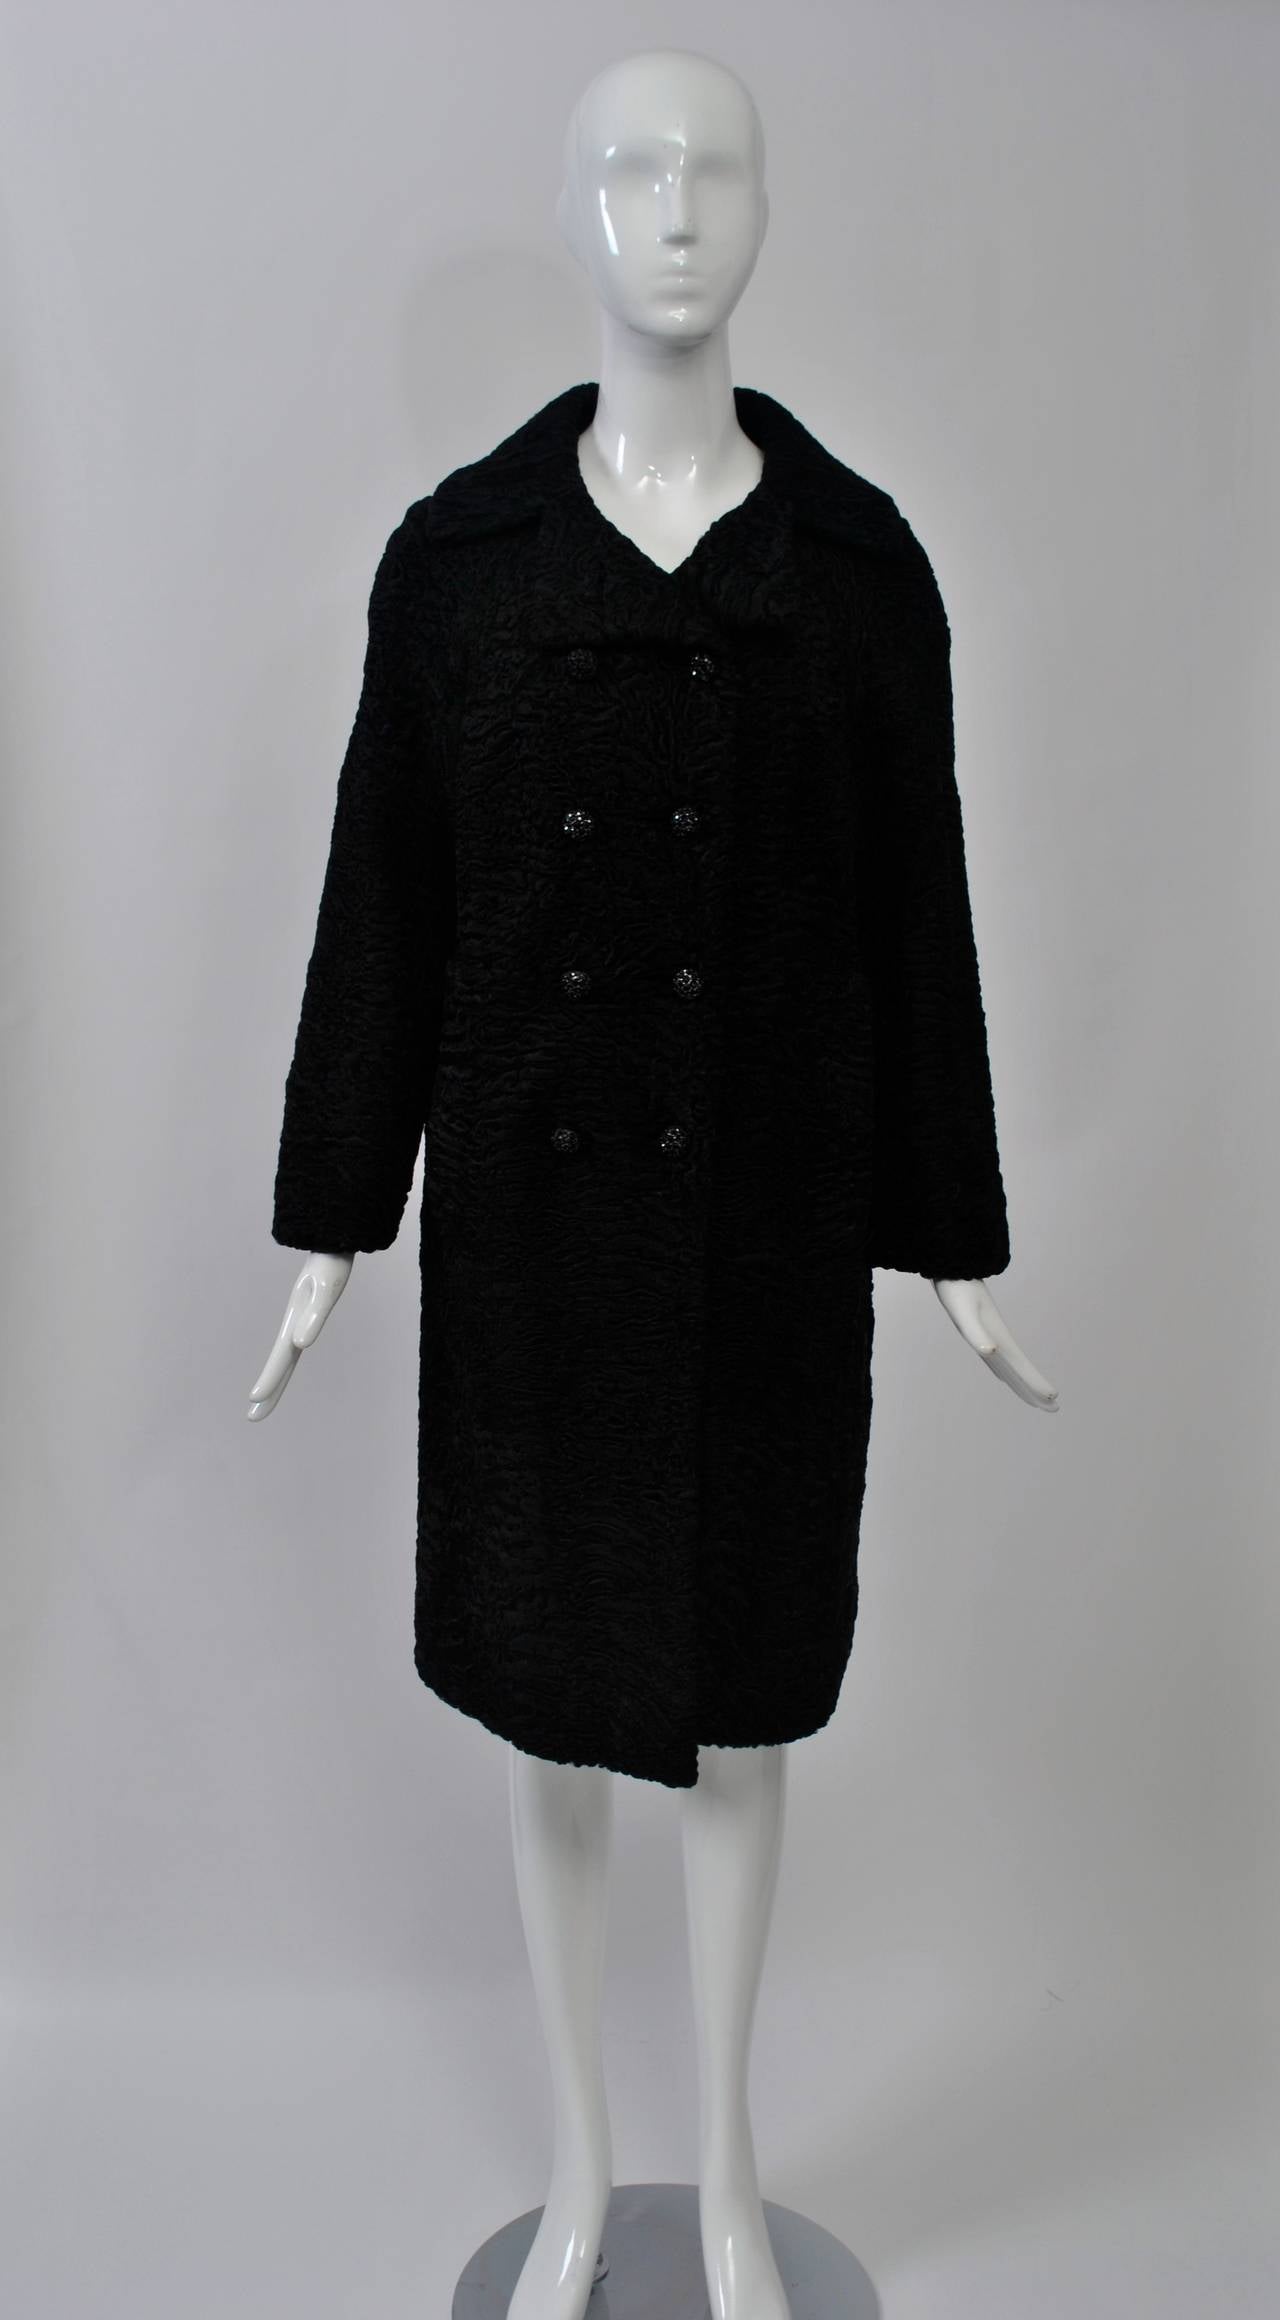 A classic, double-breasted coat in black Persian lamb, the fur tightly curled and compact. Dressy buttons are dome-shaped studded with black rhinestones. Side pockets.  Silk lining. All in excellent condition. Approximate size 6-10. Timeless styling